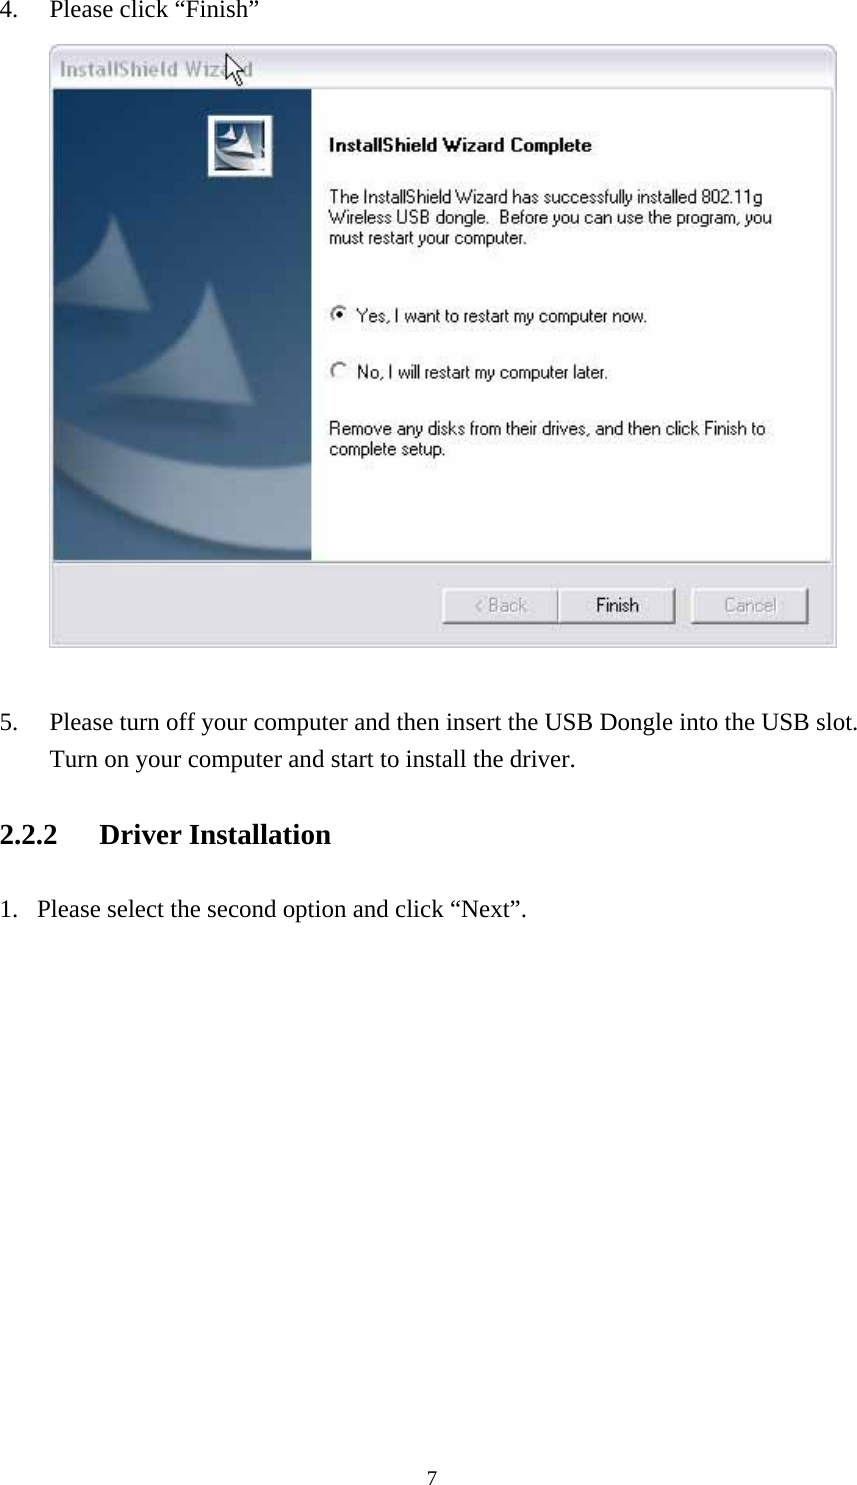  74. Please click “Finish”   5. Please turn off your computer and then insert the USB Dongle into the USB slot.   Turn on your computer and start to install the driver. 2.2.2 Driver Installation 1. Please select the second option and click “Next”. 